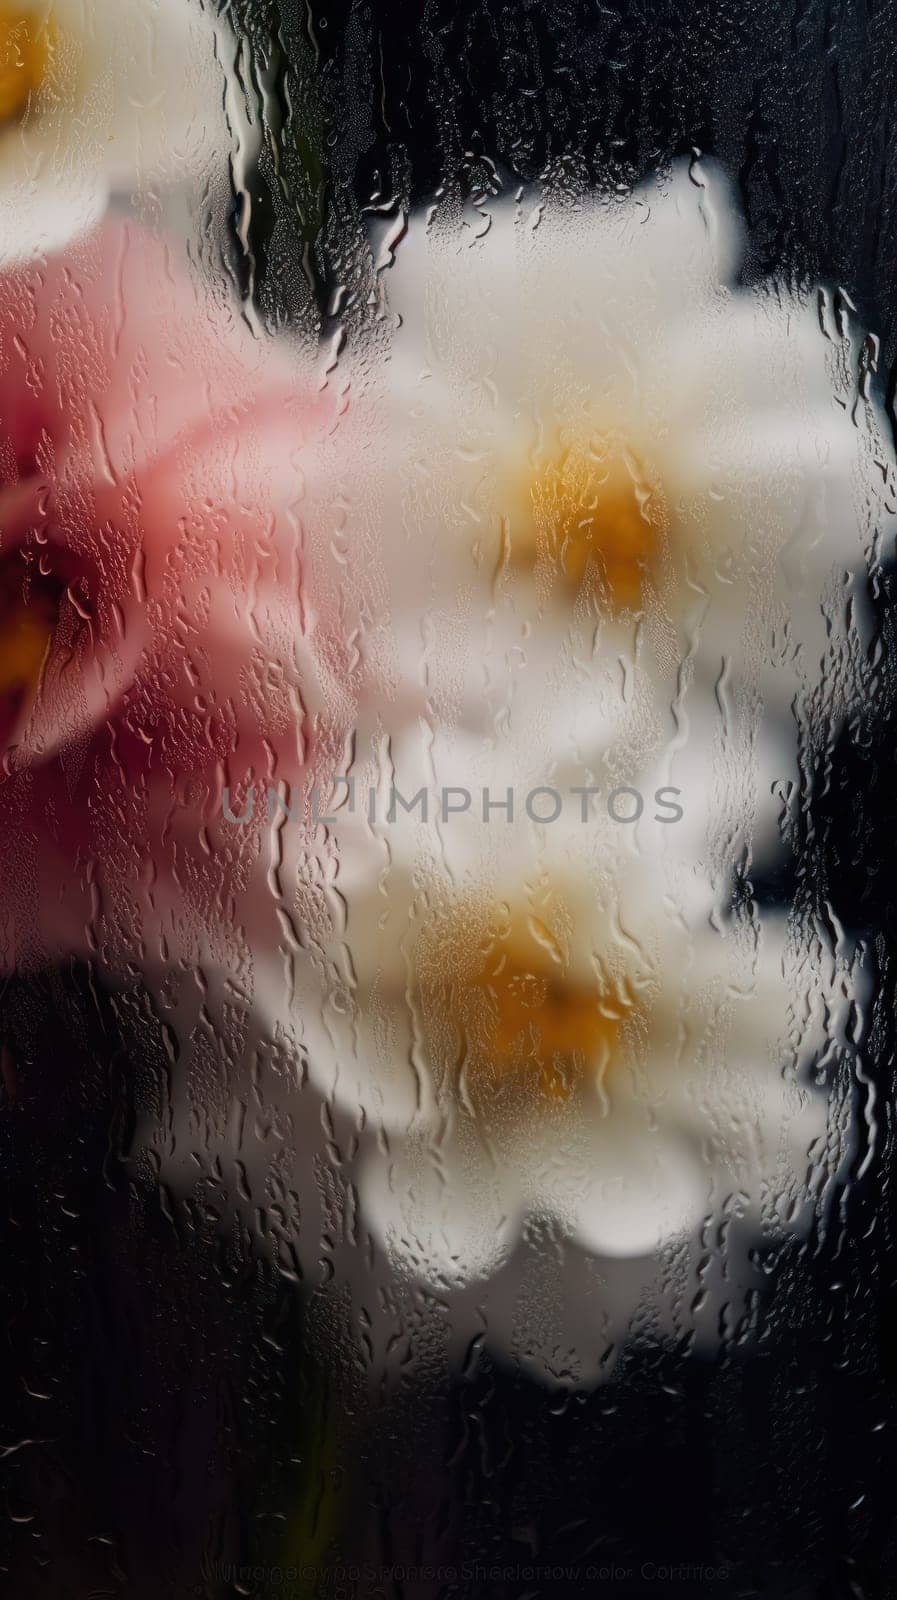 Background of blooming flowers in front of glass with water drops Stock Photo.